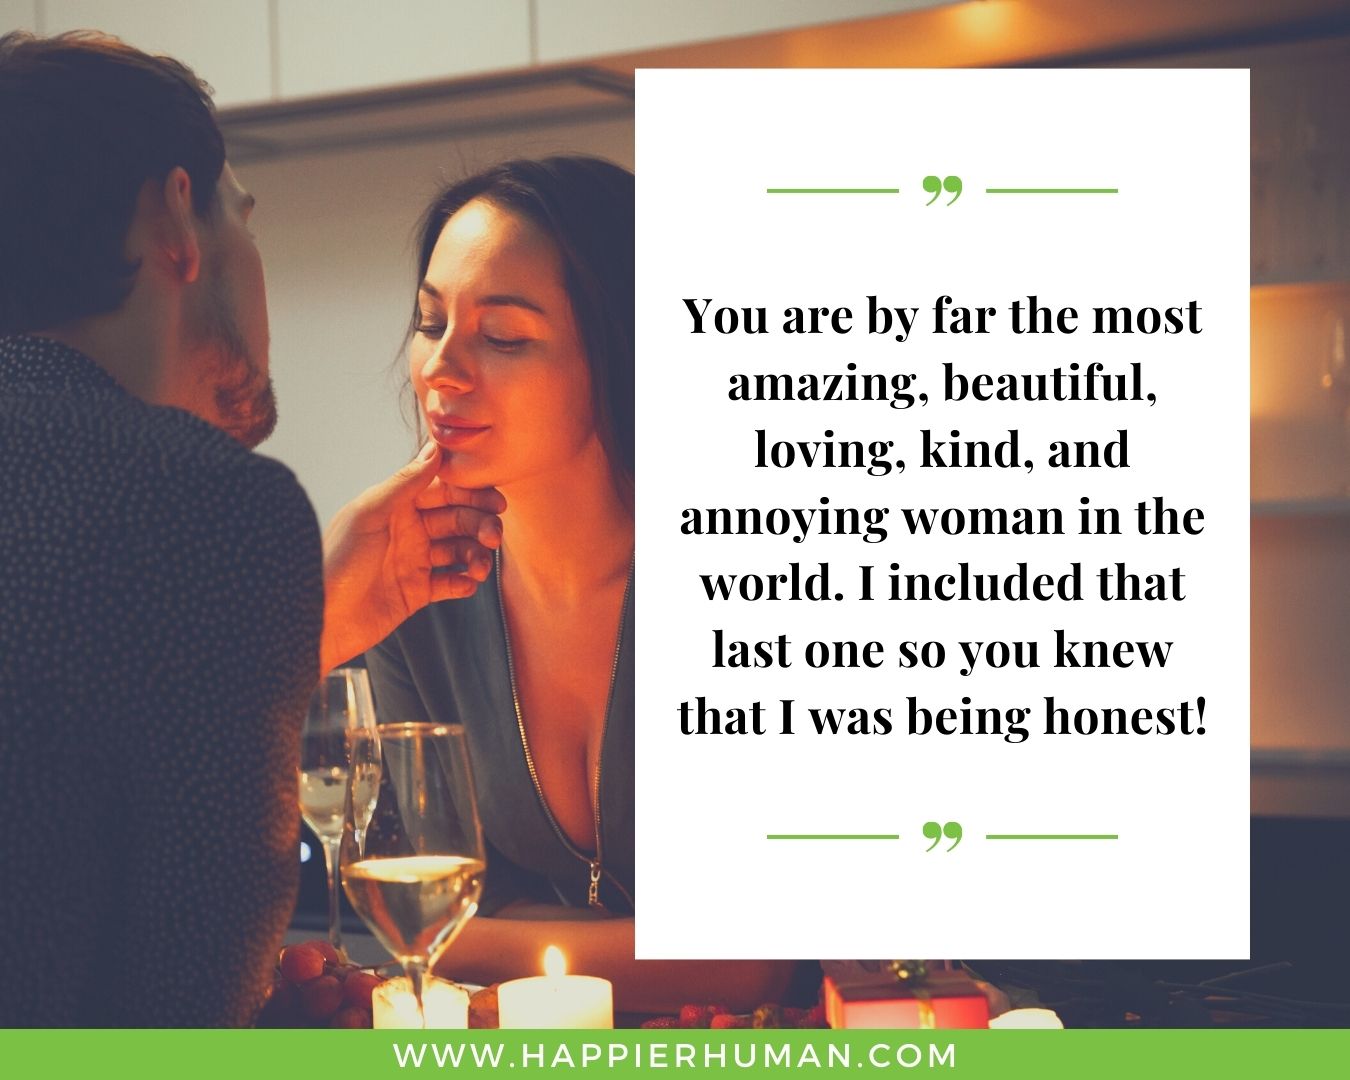 Funny Love Quotes for Her - “You are by far the most amazing, beautiful, loving, kind, and annoying woman in the world. I included that last one so you knew that I was being honest!”